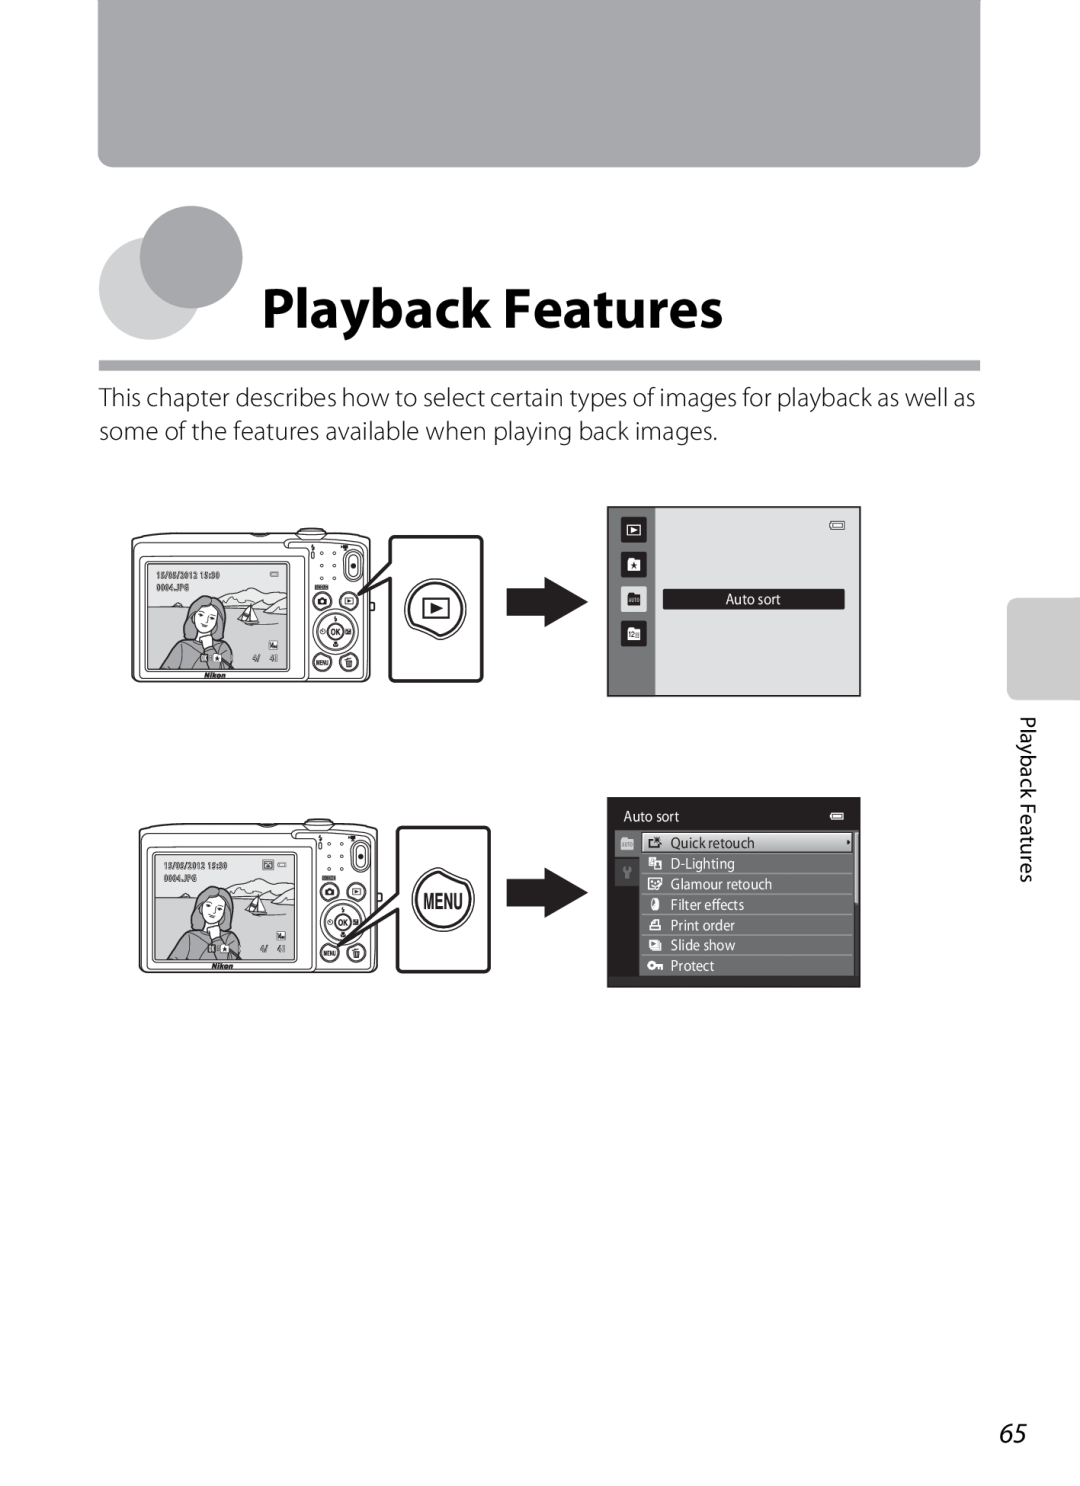 Nikon S2600 Playback Features, some of the features available when playing back images, Auto sort, Quick retouch, Protect 